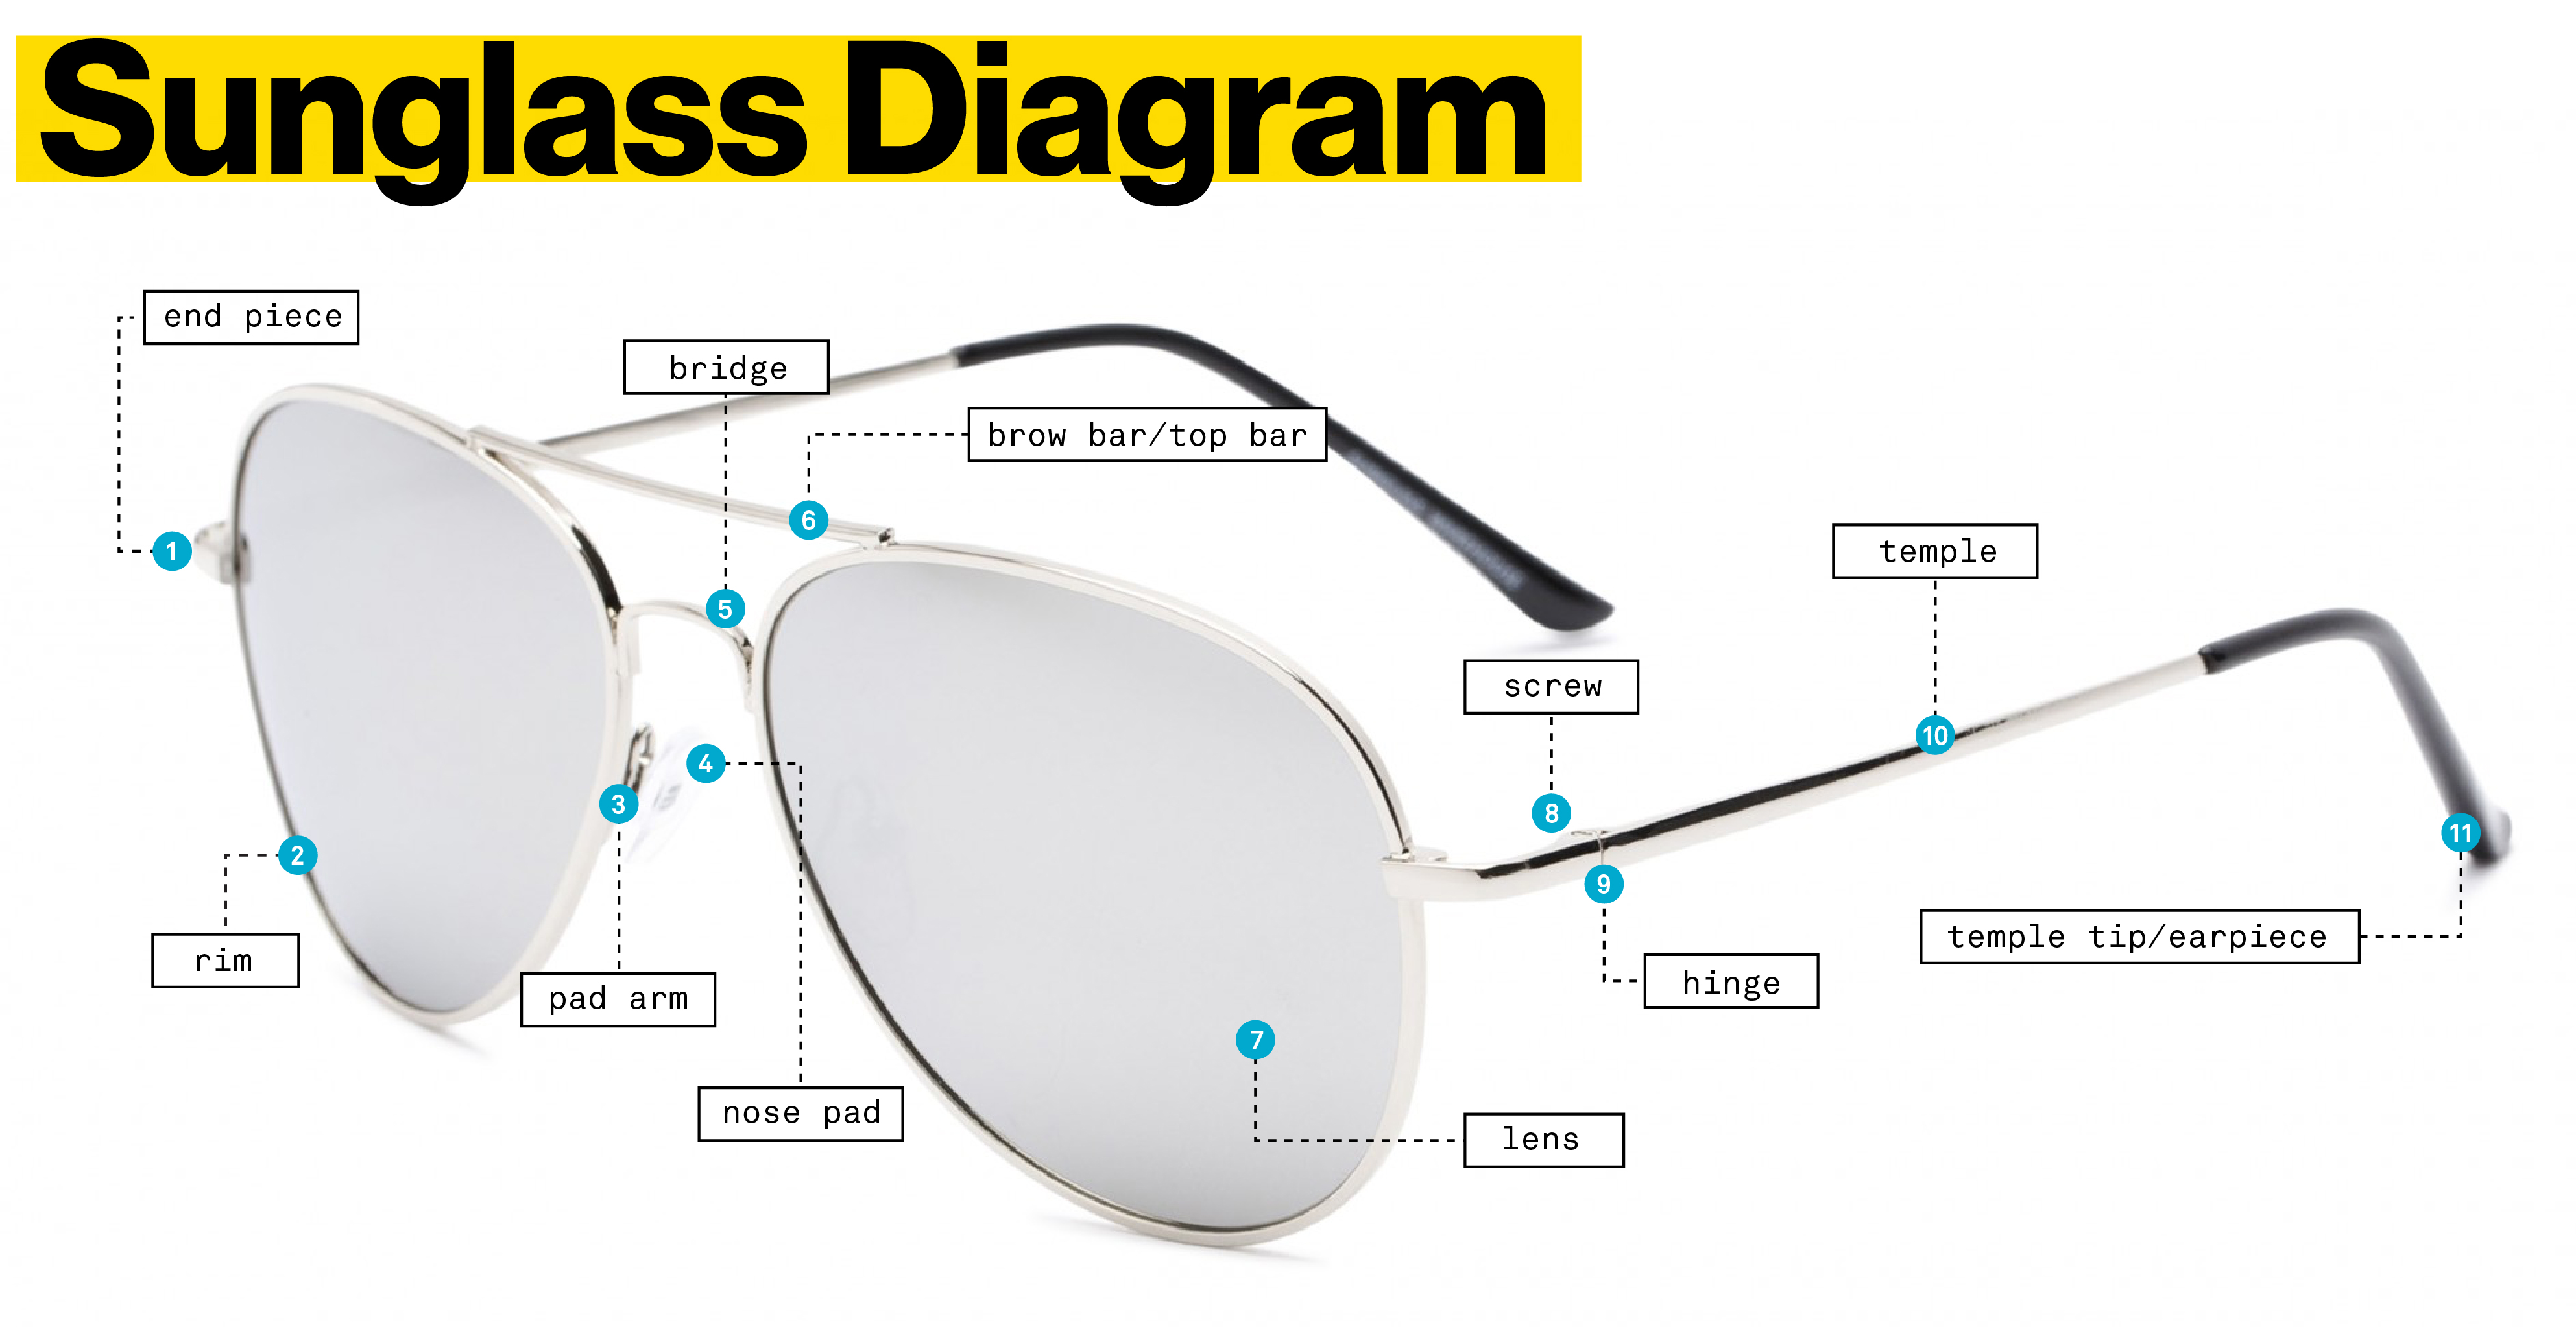 Diagram of Sunglasses Parts with Definitions